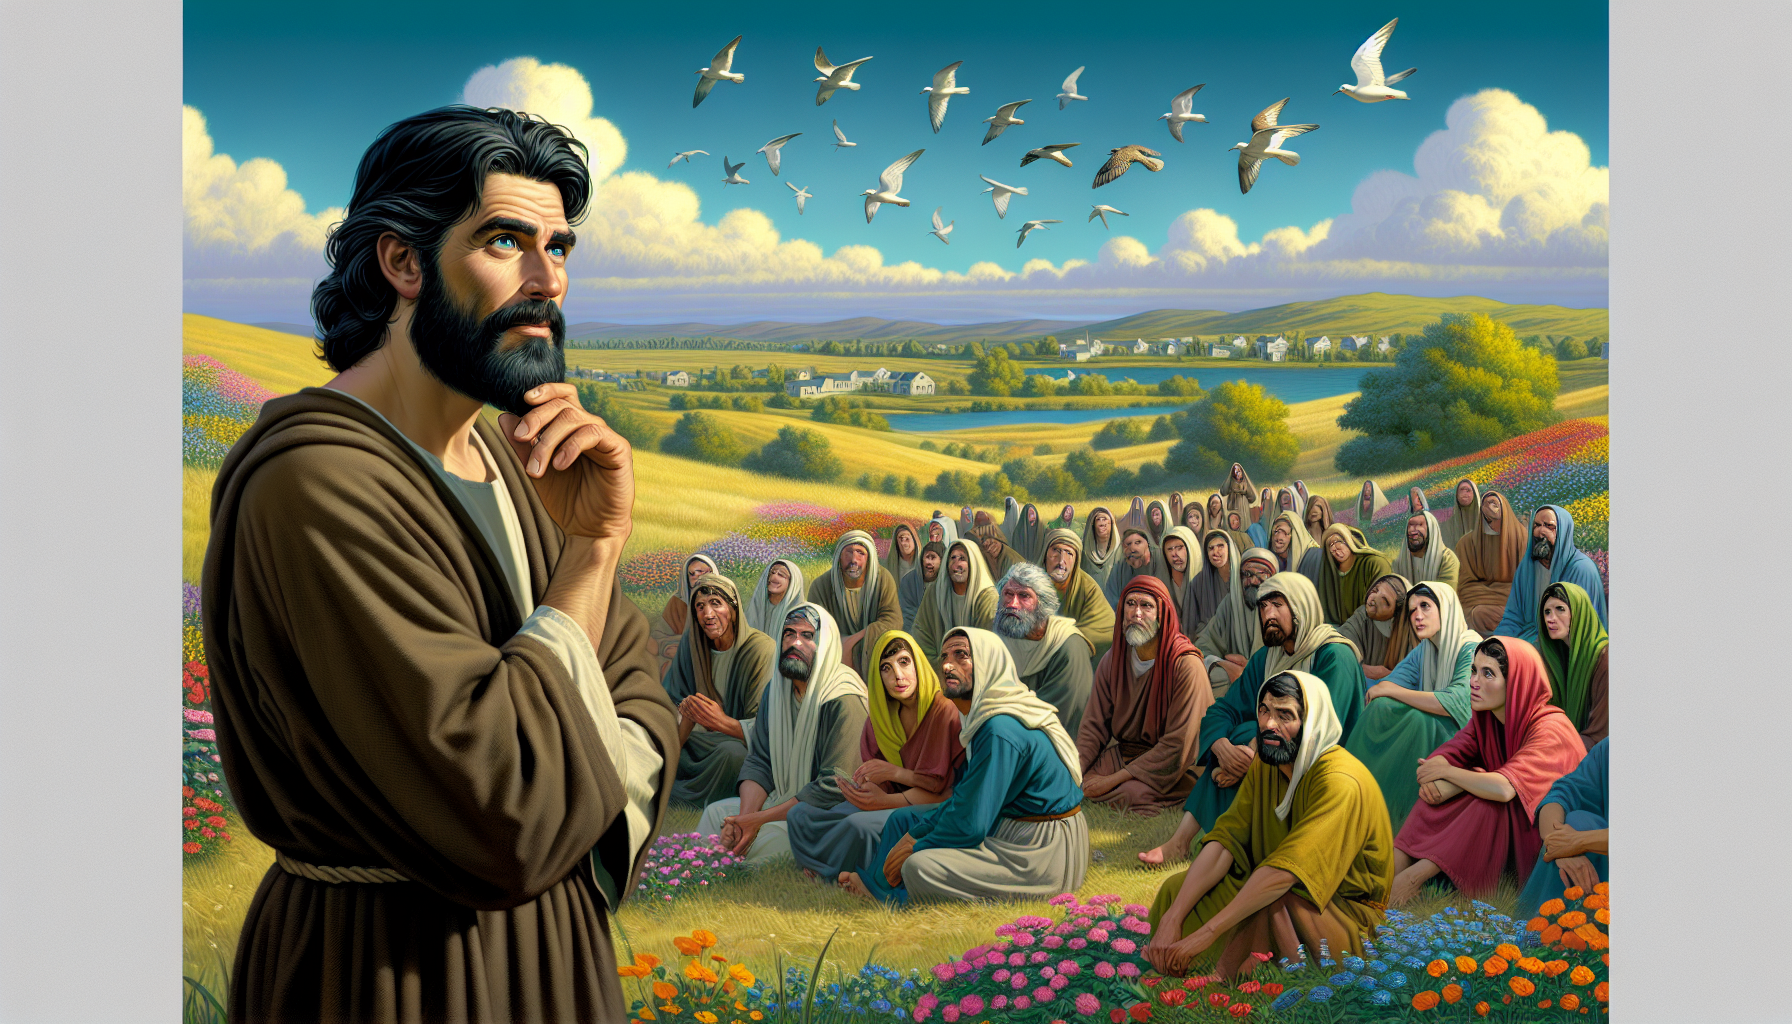 An illustration depicting the essence of Matthew 6:25-34, where Jesus is addressing a crowd on a serene hillside. Jesus is gesturing thoughtfully while surrounded by natural elements such as birds in